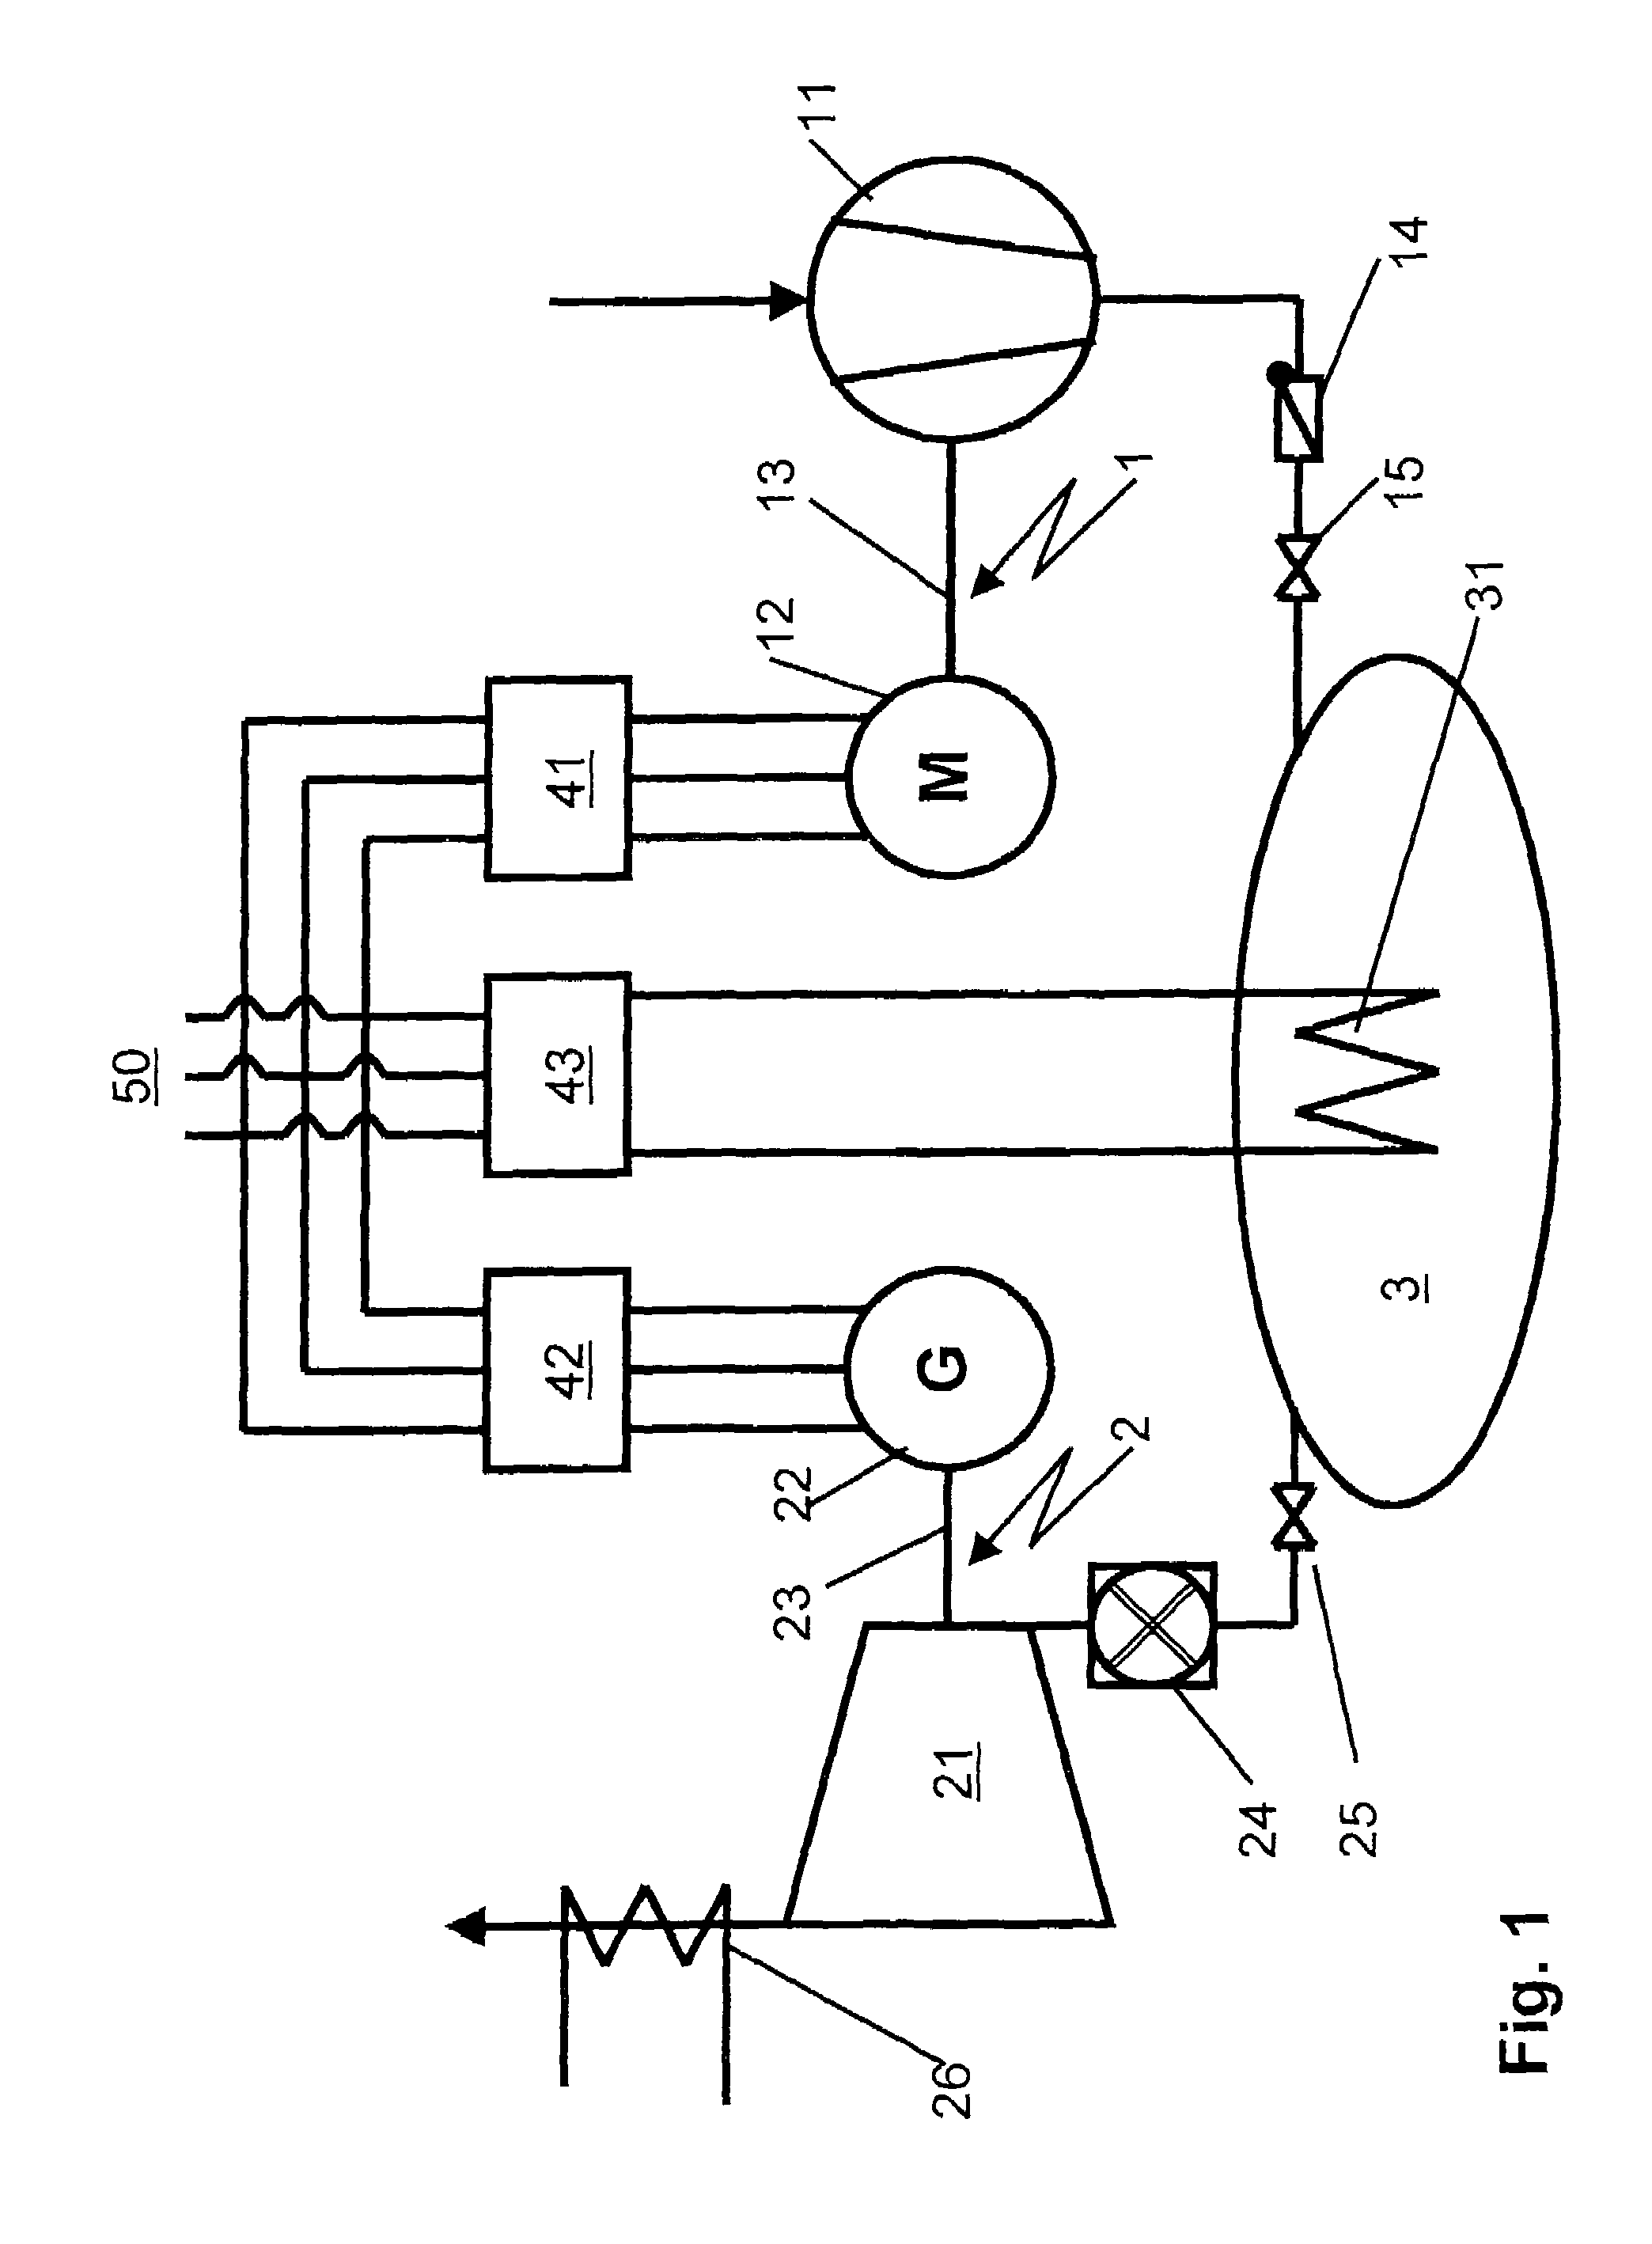 Method and apparatus for operation of a power station